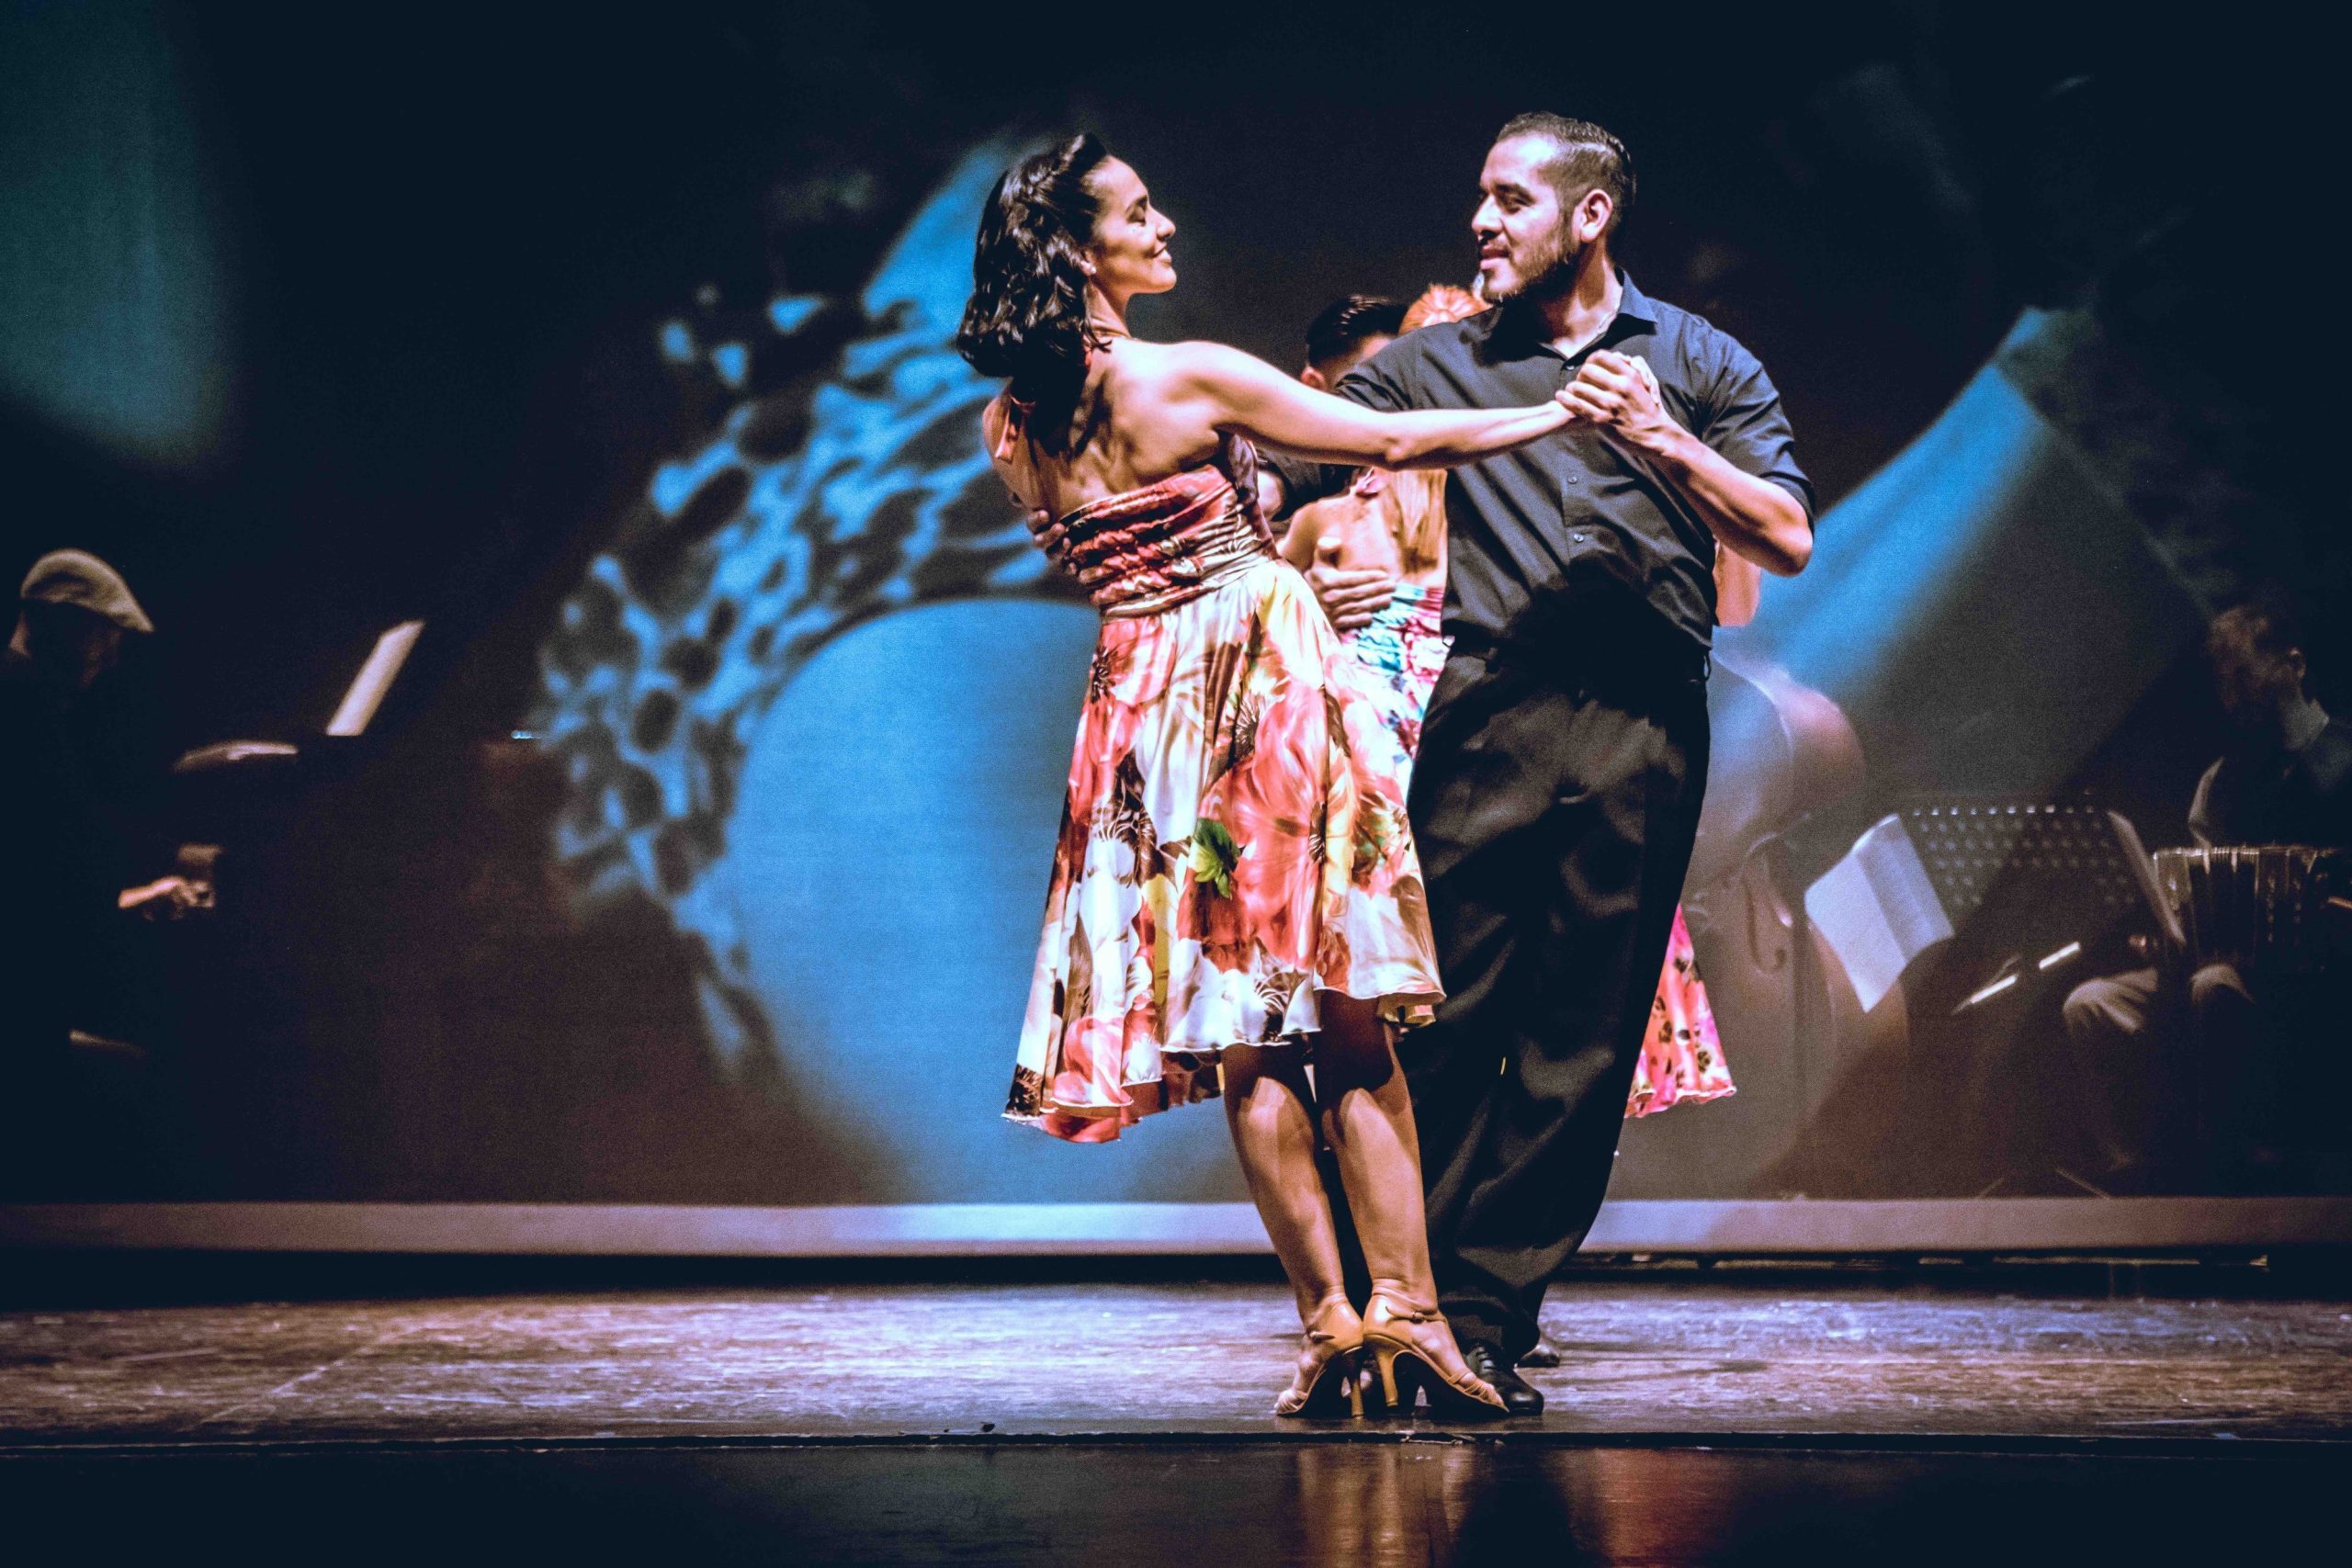 A pair of tango dancers appear on a dimly lit stage. He is wearing dark pants and a button-down shirt, and she is wearing a floral dress. They are dancing in each other's arms with smiles on their faces.